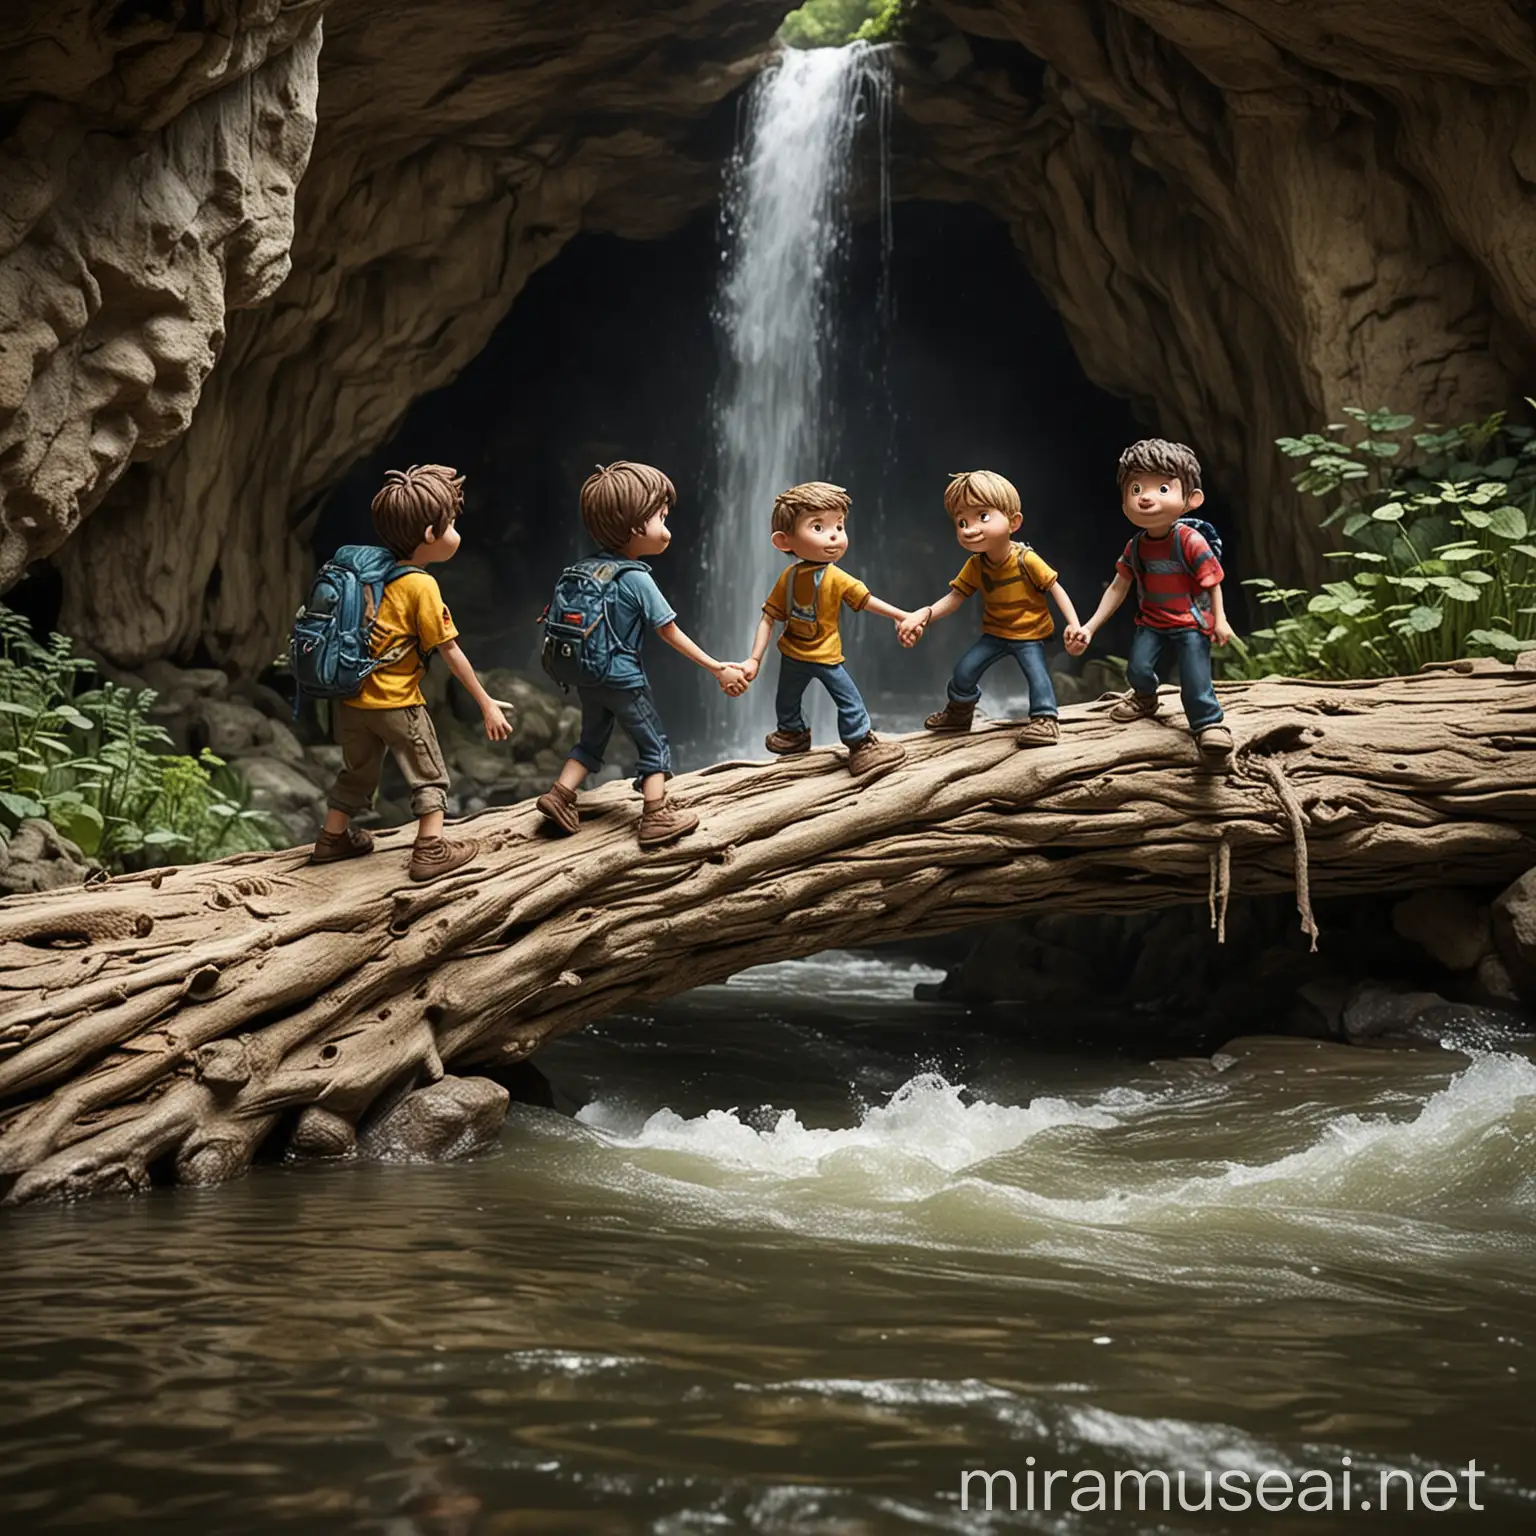 Facing Challenges Tommy is scared of crossing the river and entering the cave, but his friends support him. They work together, using a fallen log to cross the river and holding hands as they enter the cave.